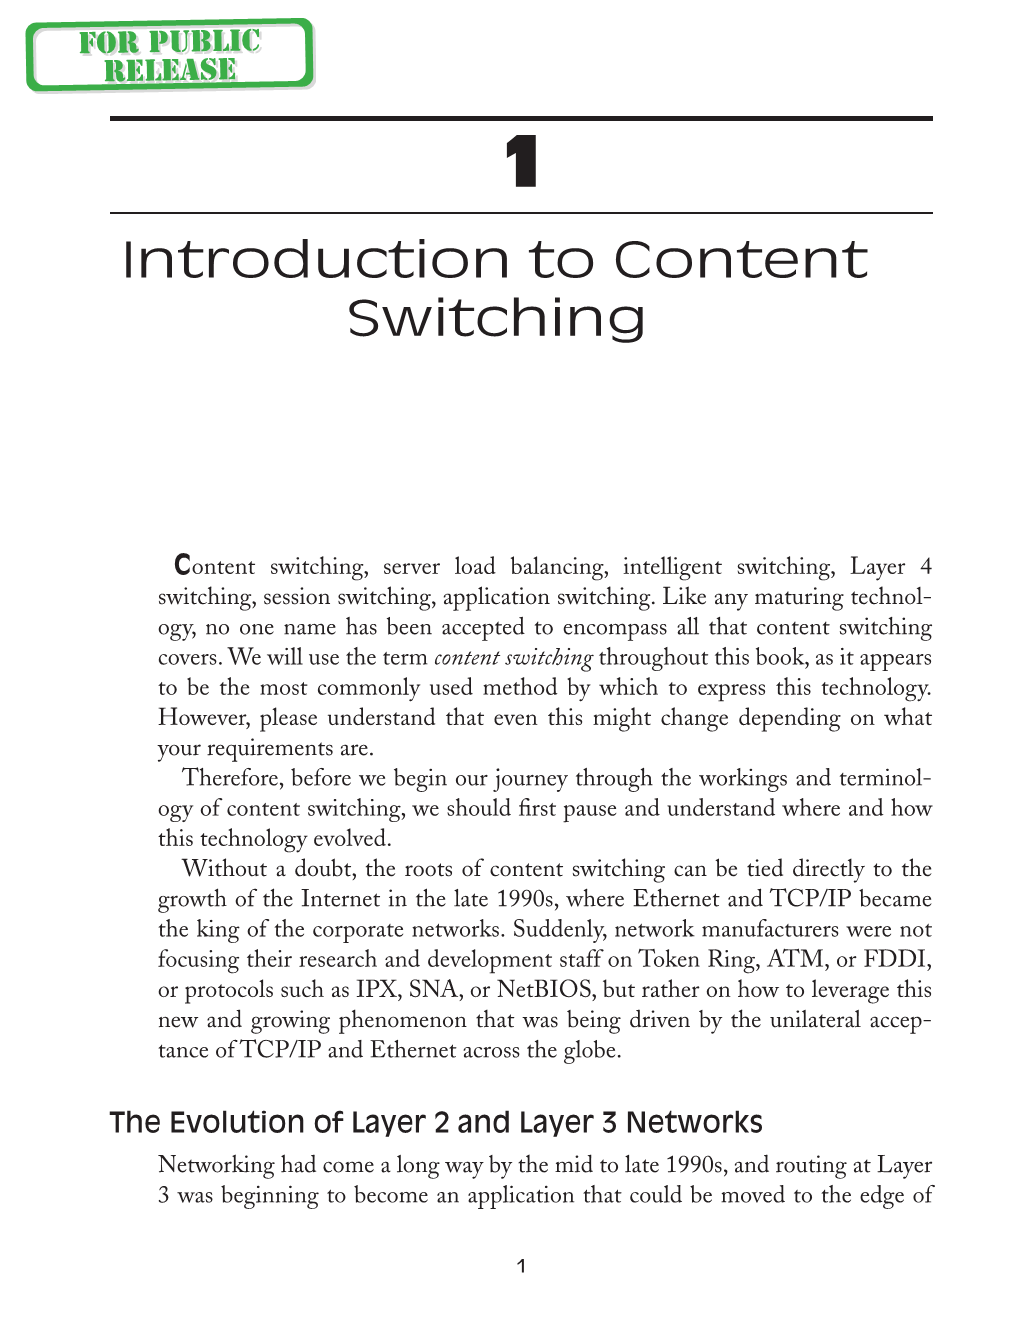 Introduction to Content Switching